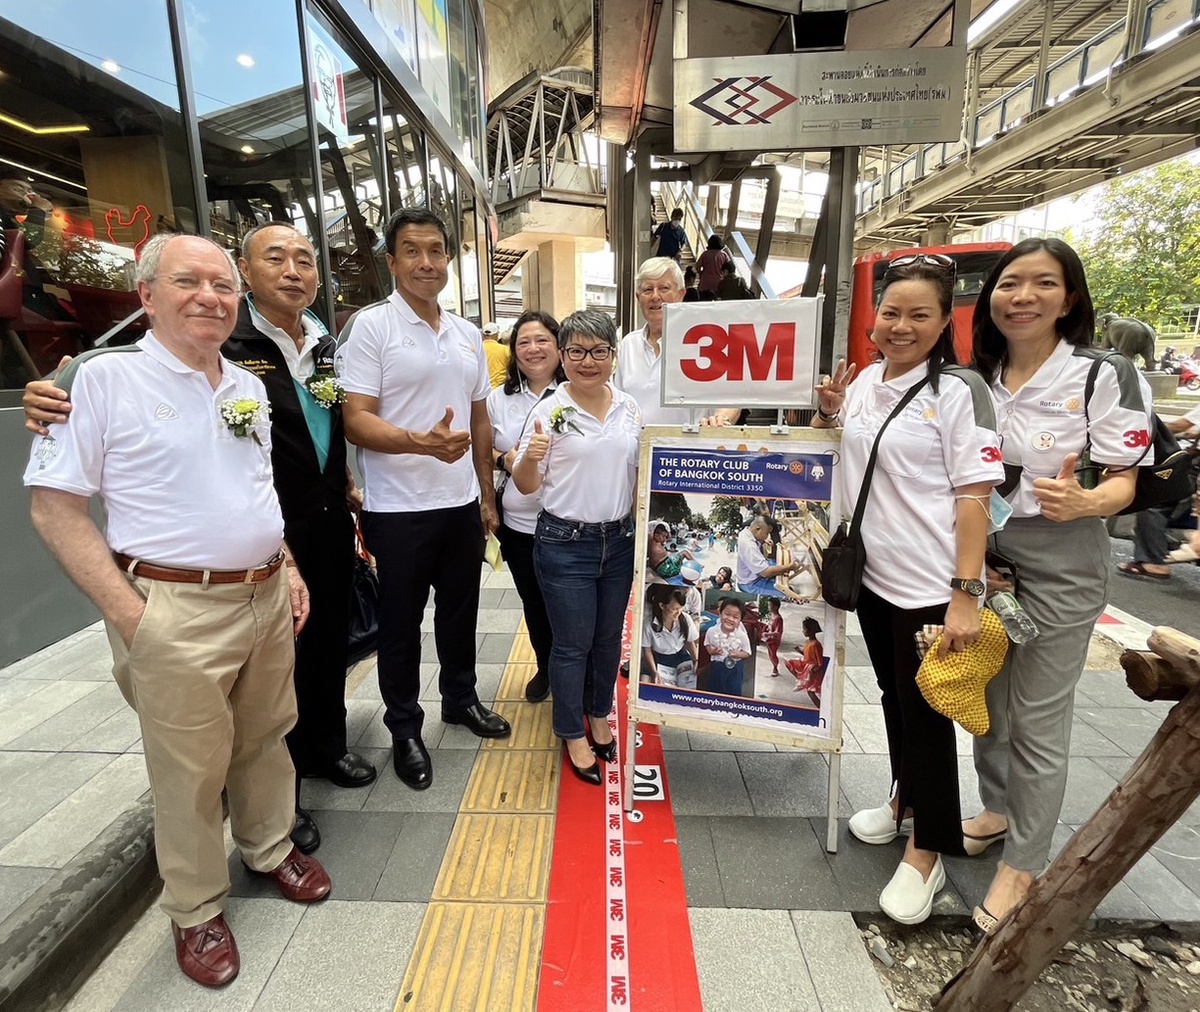 3M Continues to Sponsor Coins on Silom Fundraising Event to Aid Vulnerable Youth